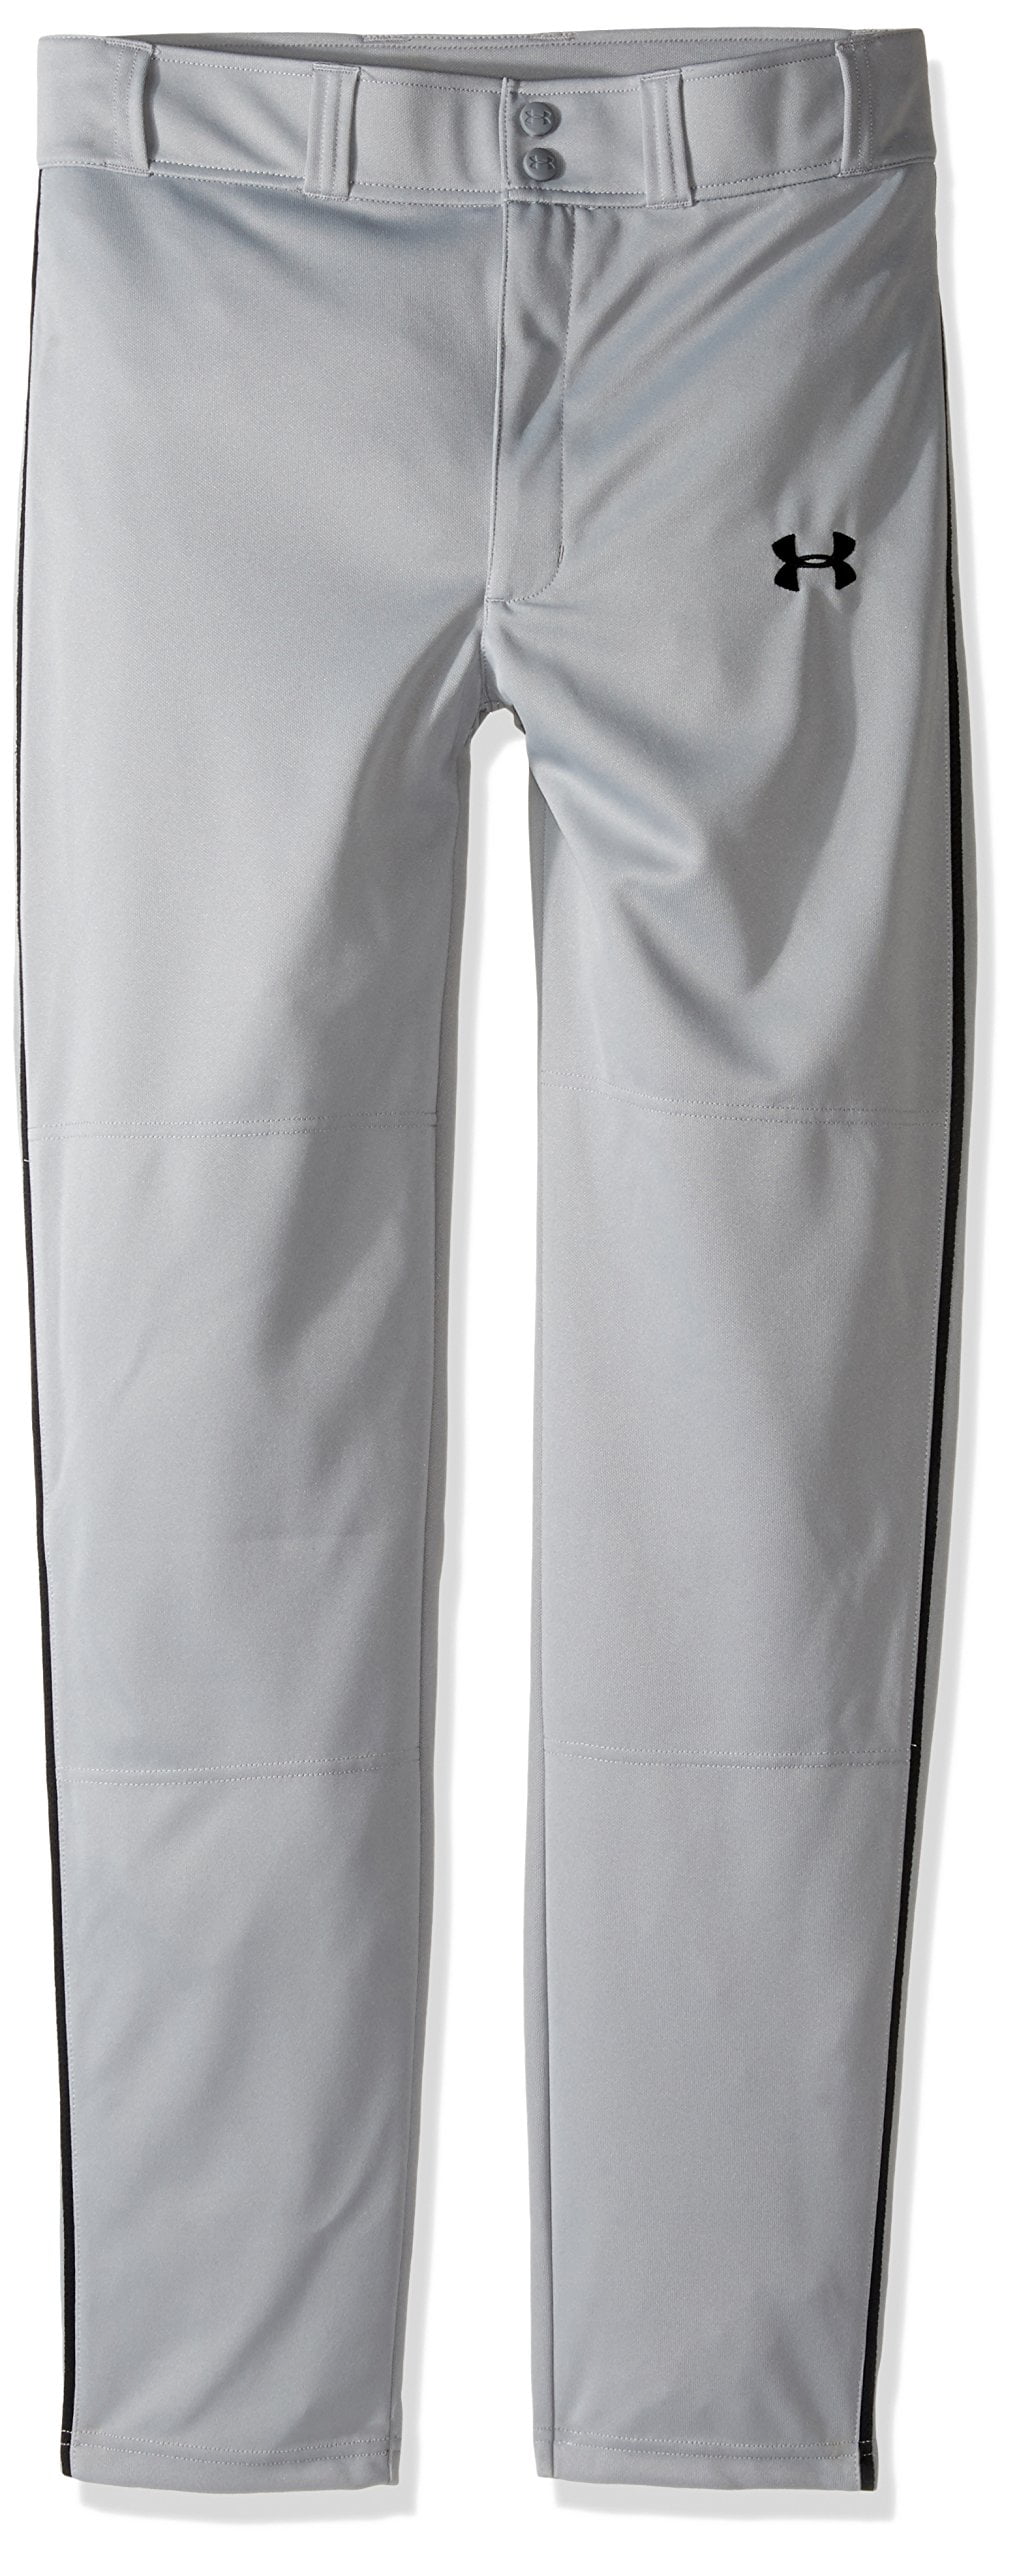 under armour youth large pants